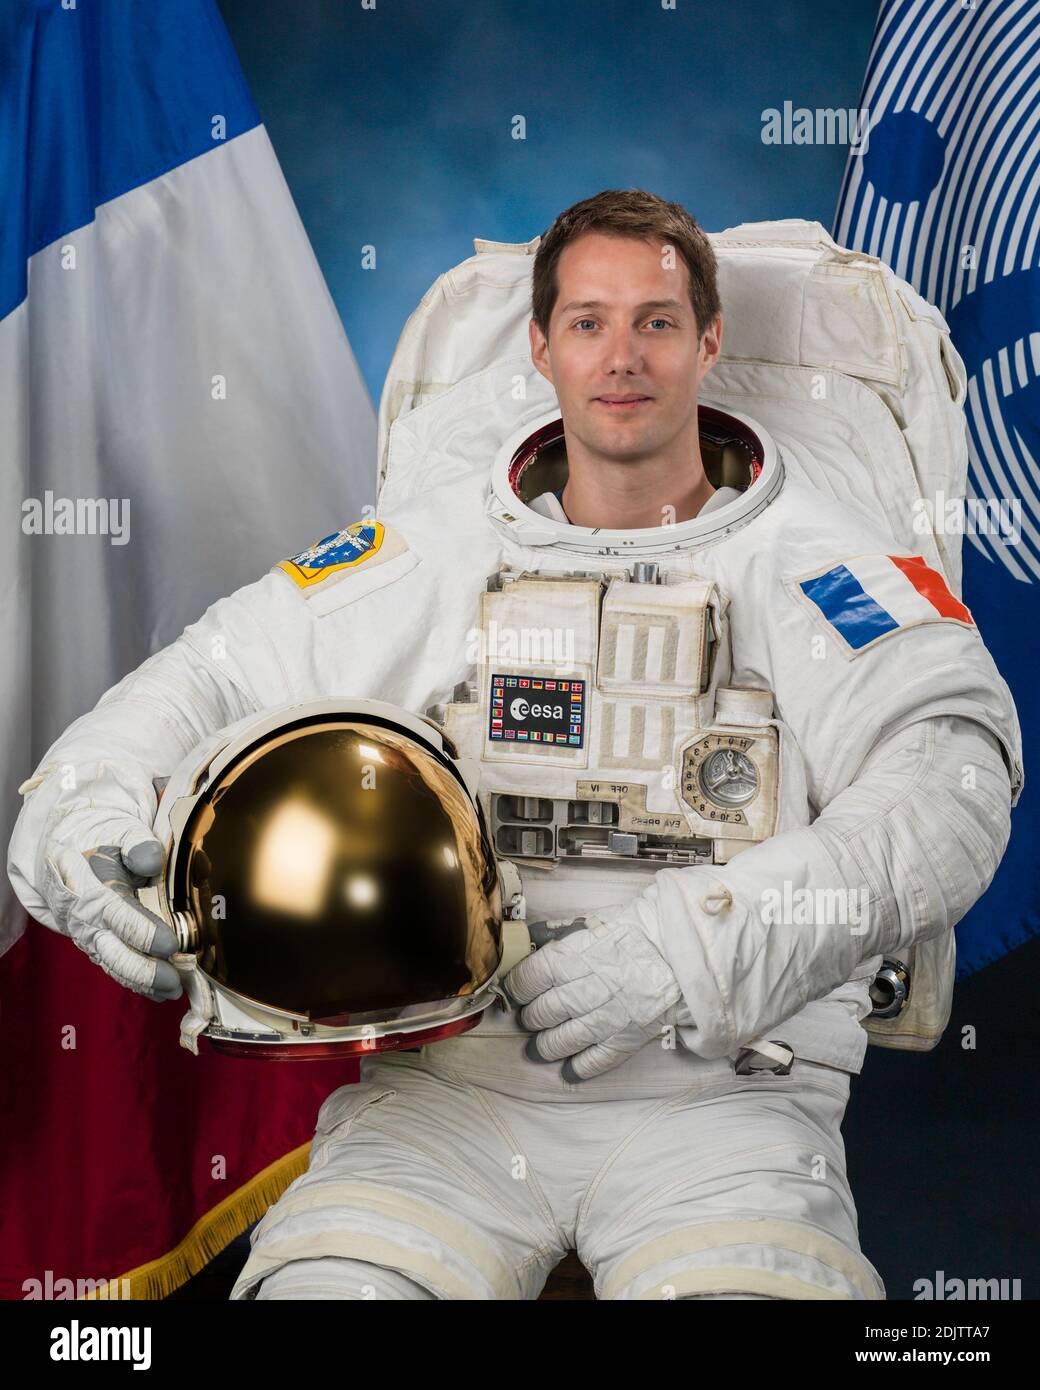 Official portrait of ESA astronaut & Expedition 50/51 crew member Thomas Pesquet in Nasa center Building 8 in Houston Texas, USA on March 3, 2016. Photo by Bill Stafford/NASA via ABACAPRESS.COM Stock Photo